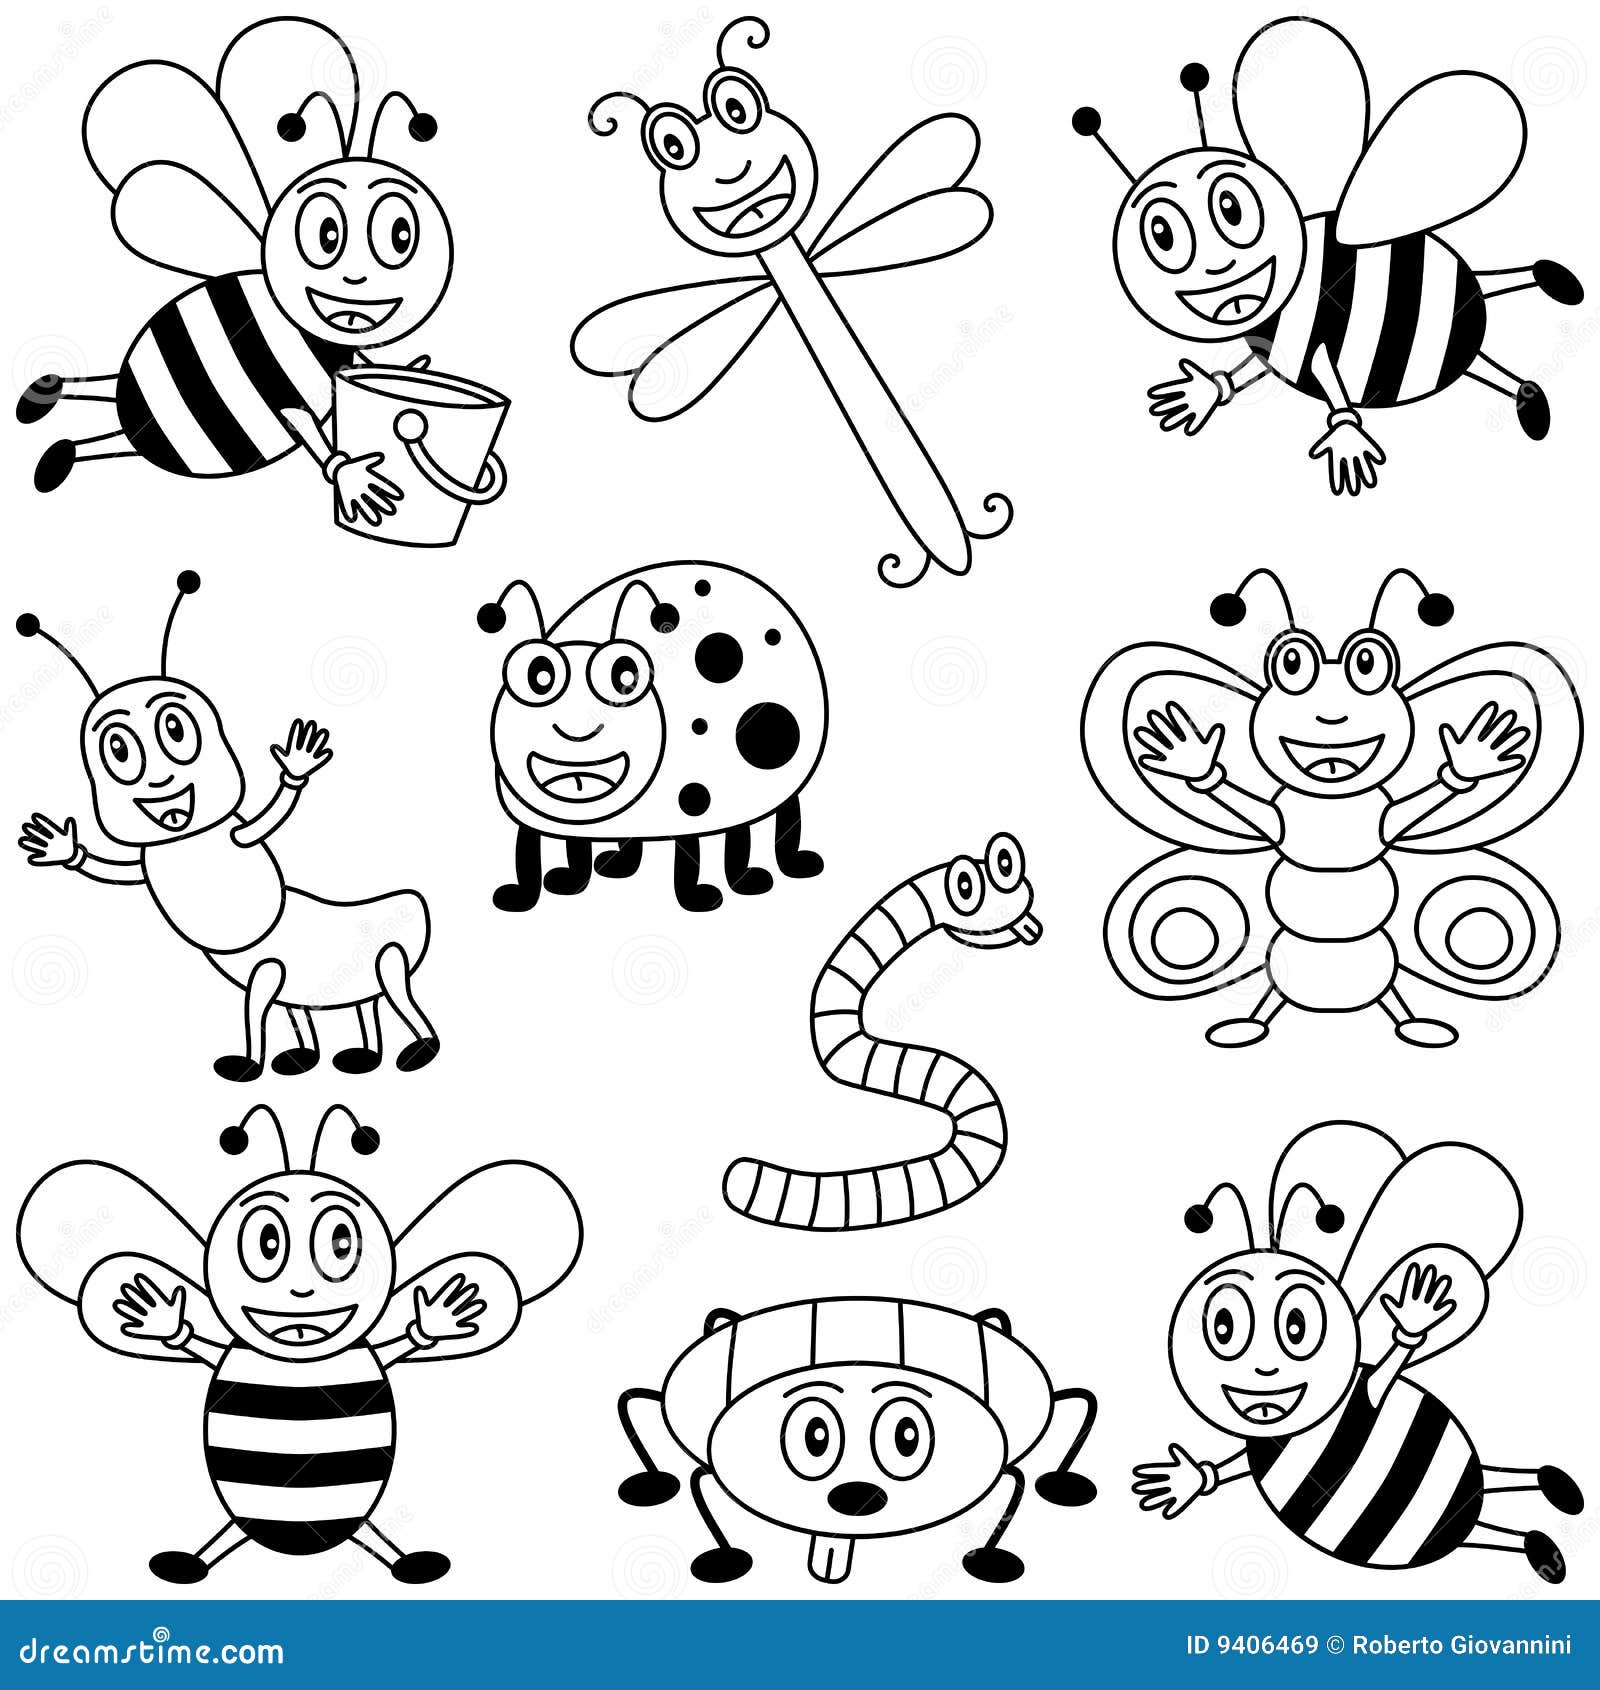 Coloring Insects For Kids Royalty Free Stock Images